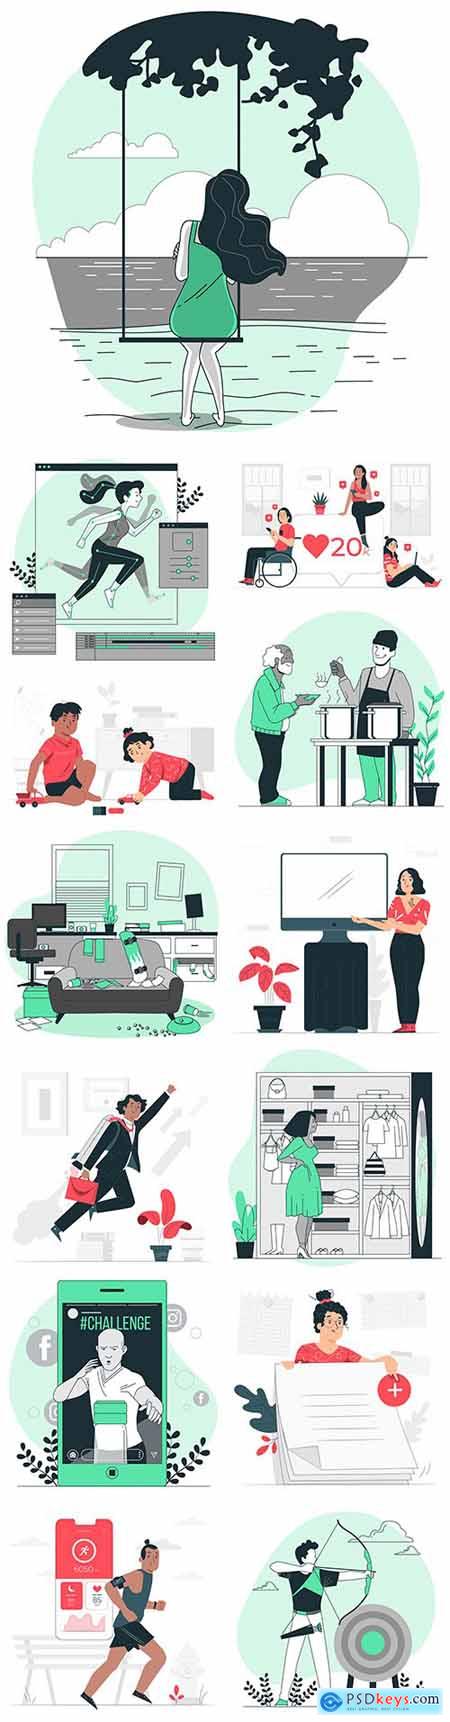 People lifestyle and different situations flat design illustration 5